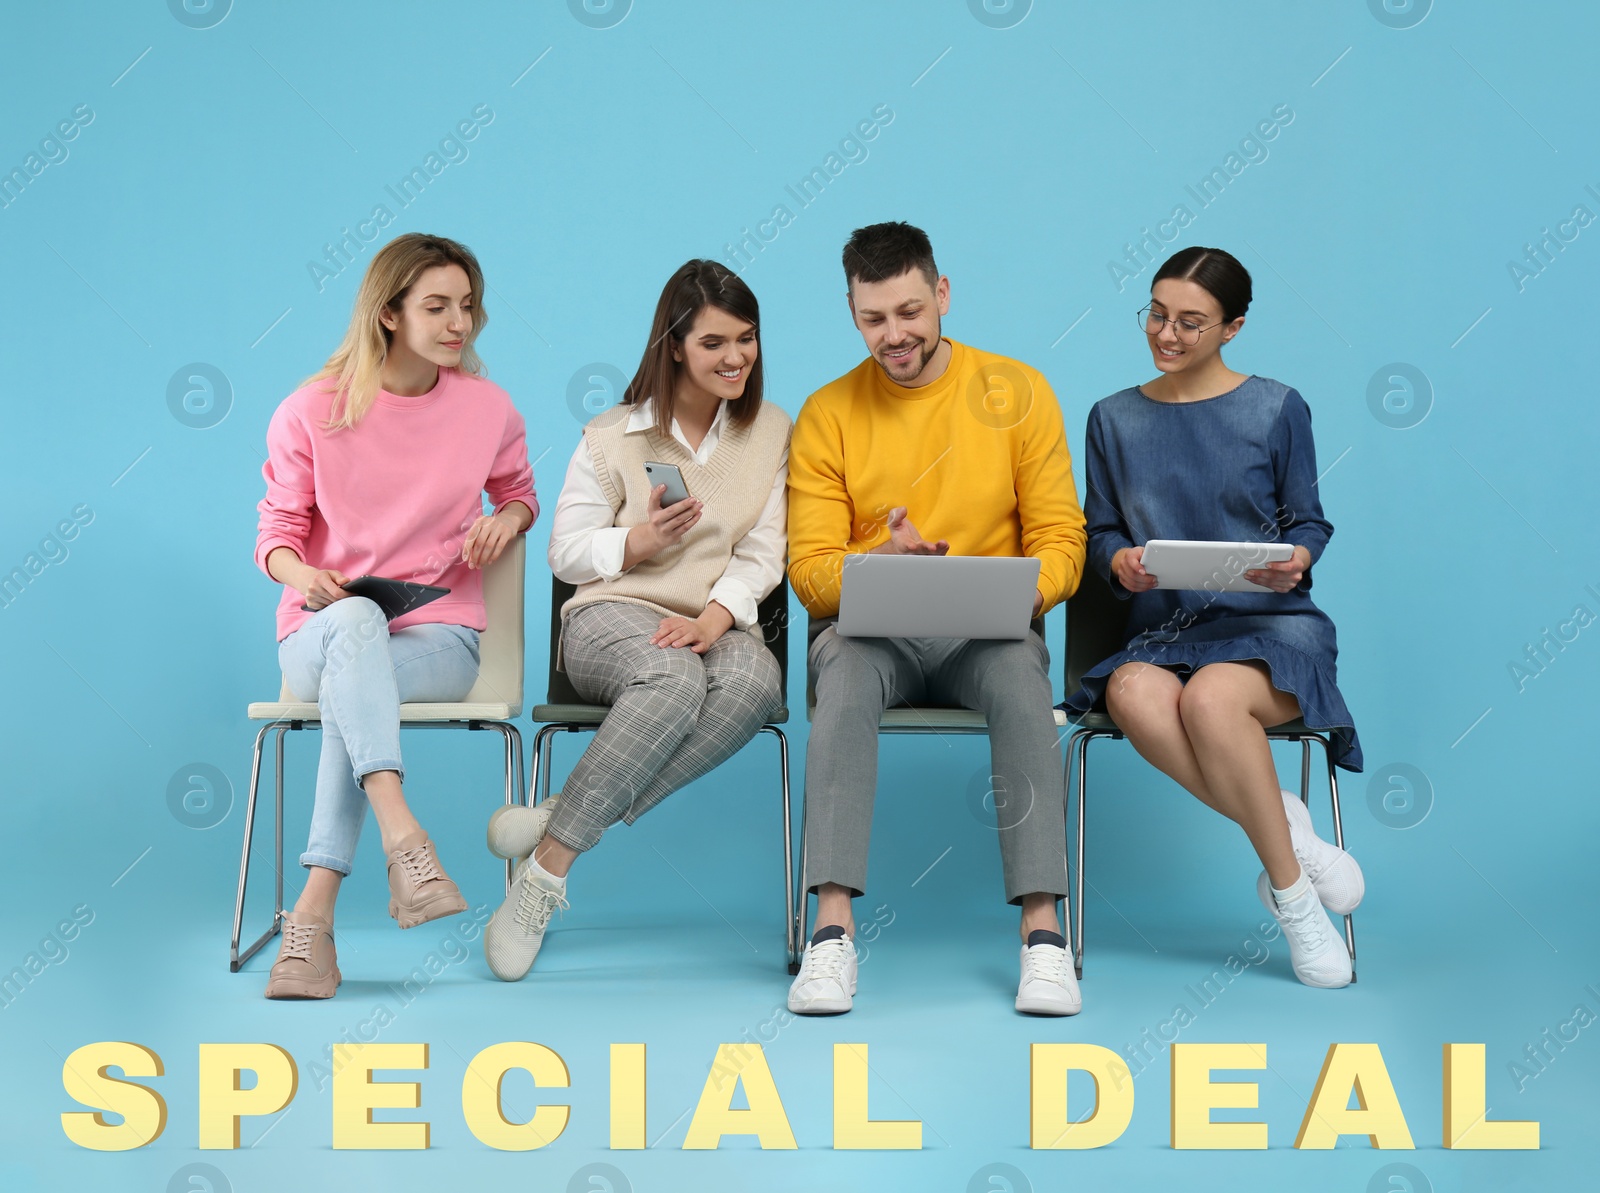 Image of Group of people on light blue background. Shopping online - special deal